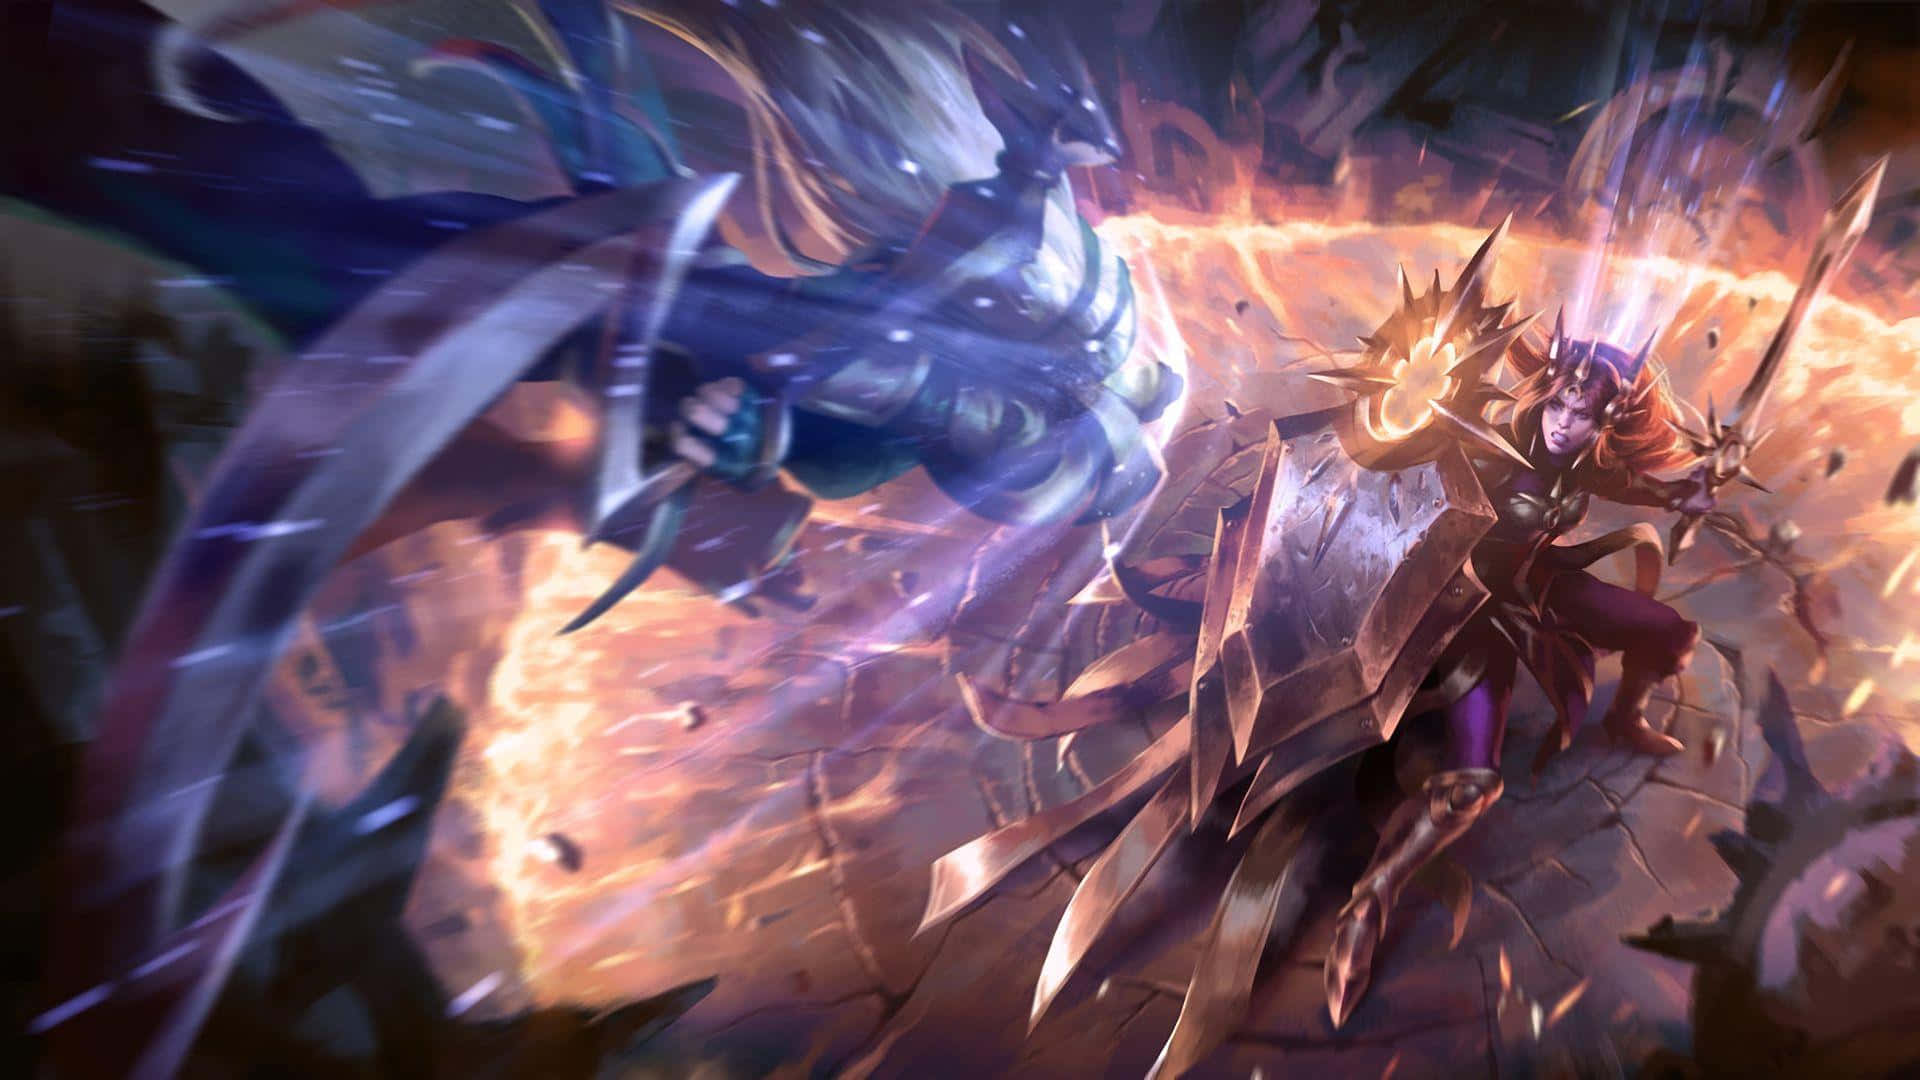 Find epic adventures with League of Legends HD Wallpaper